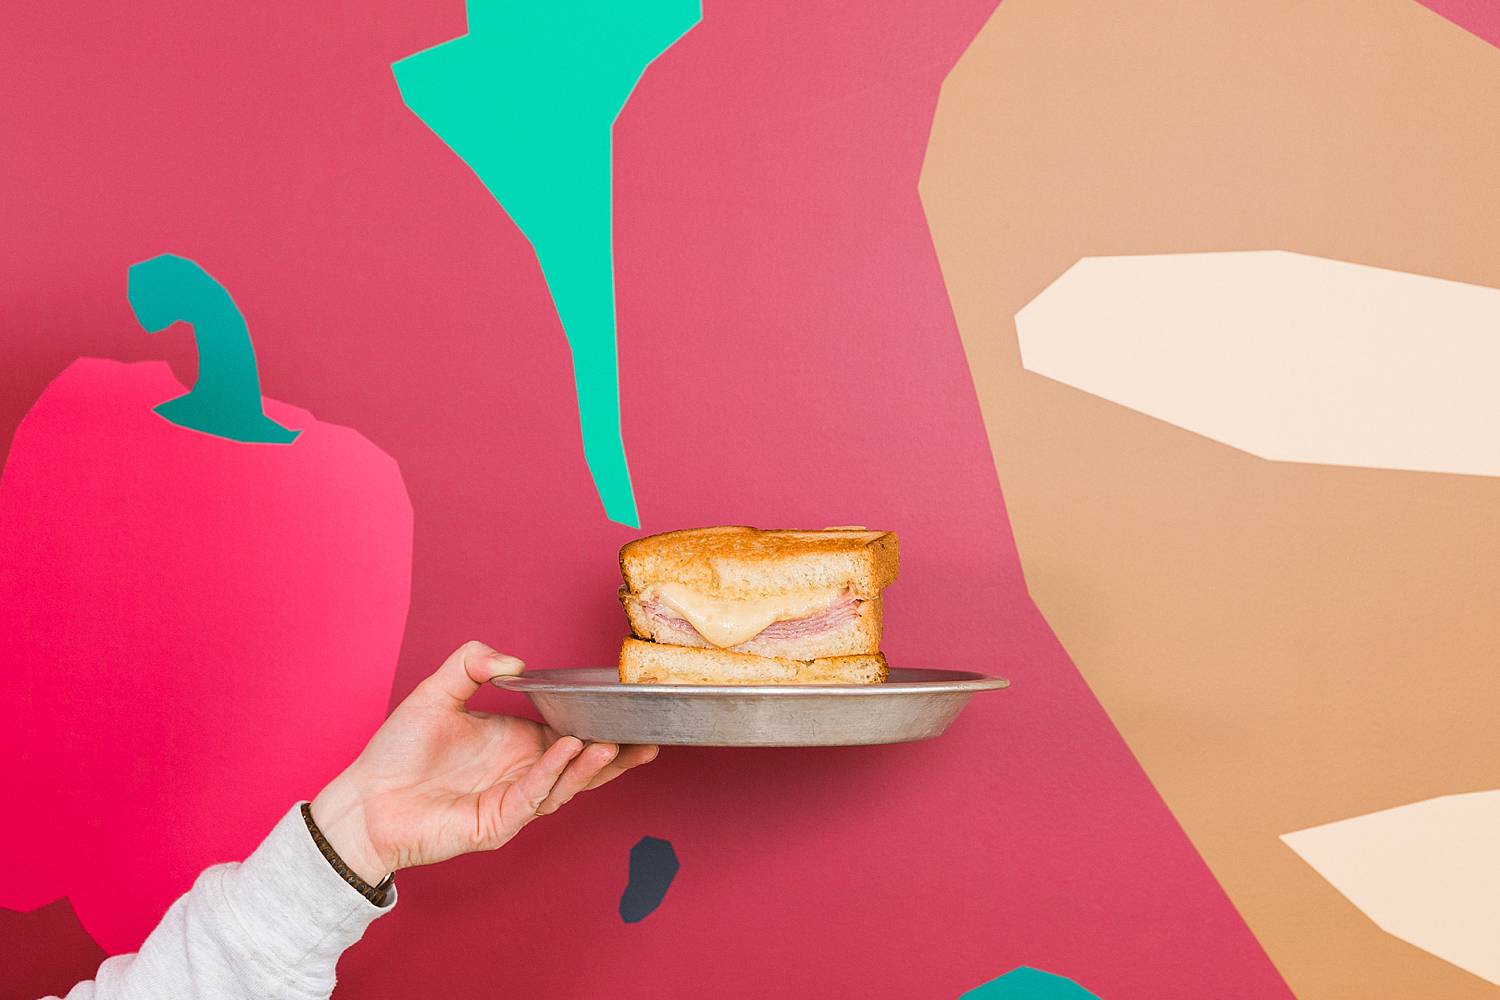 hand holding a sully's sandwich melt in front of red wall with food graphics